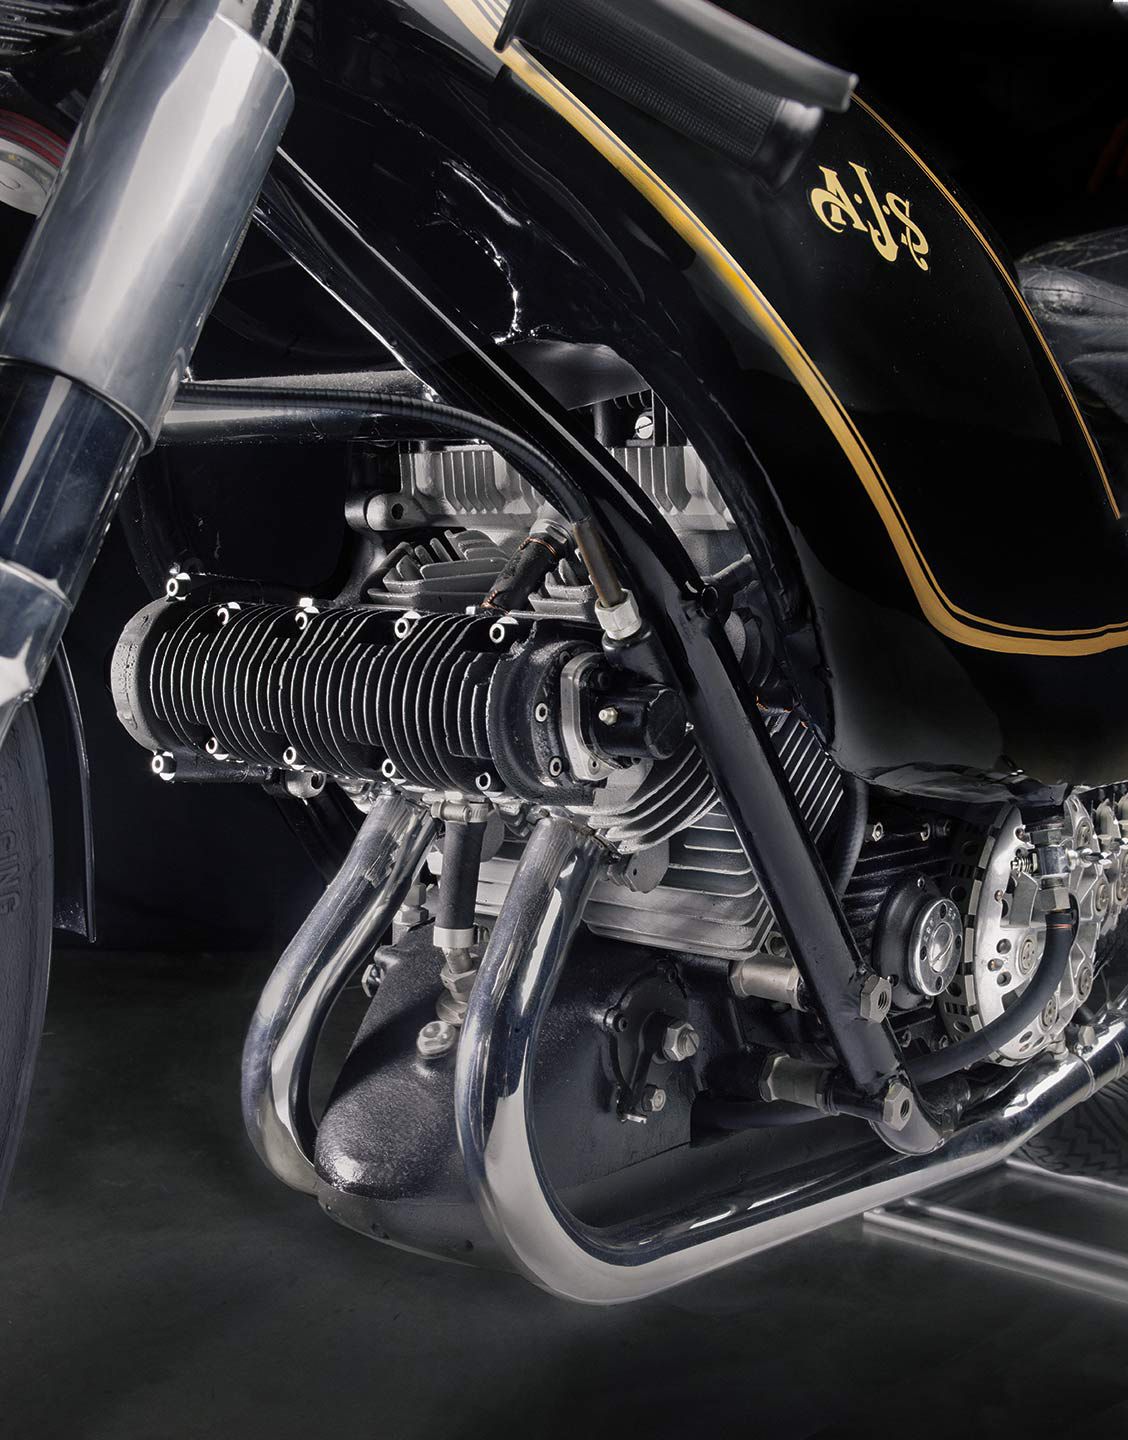 Detail of the 1954 AJS 500cc E95 “Porcupine” Works Racer. While this engine does not have the spiky fins of the original E90 model, the E95 nevertheless retained the Porcupine moniker.